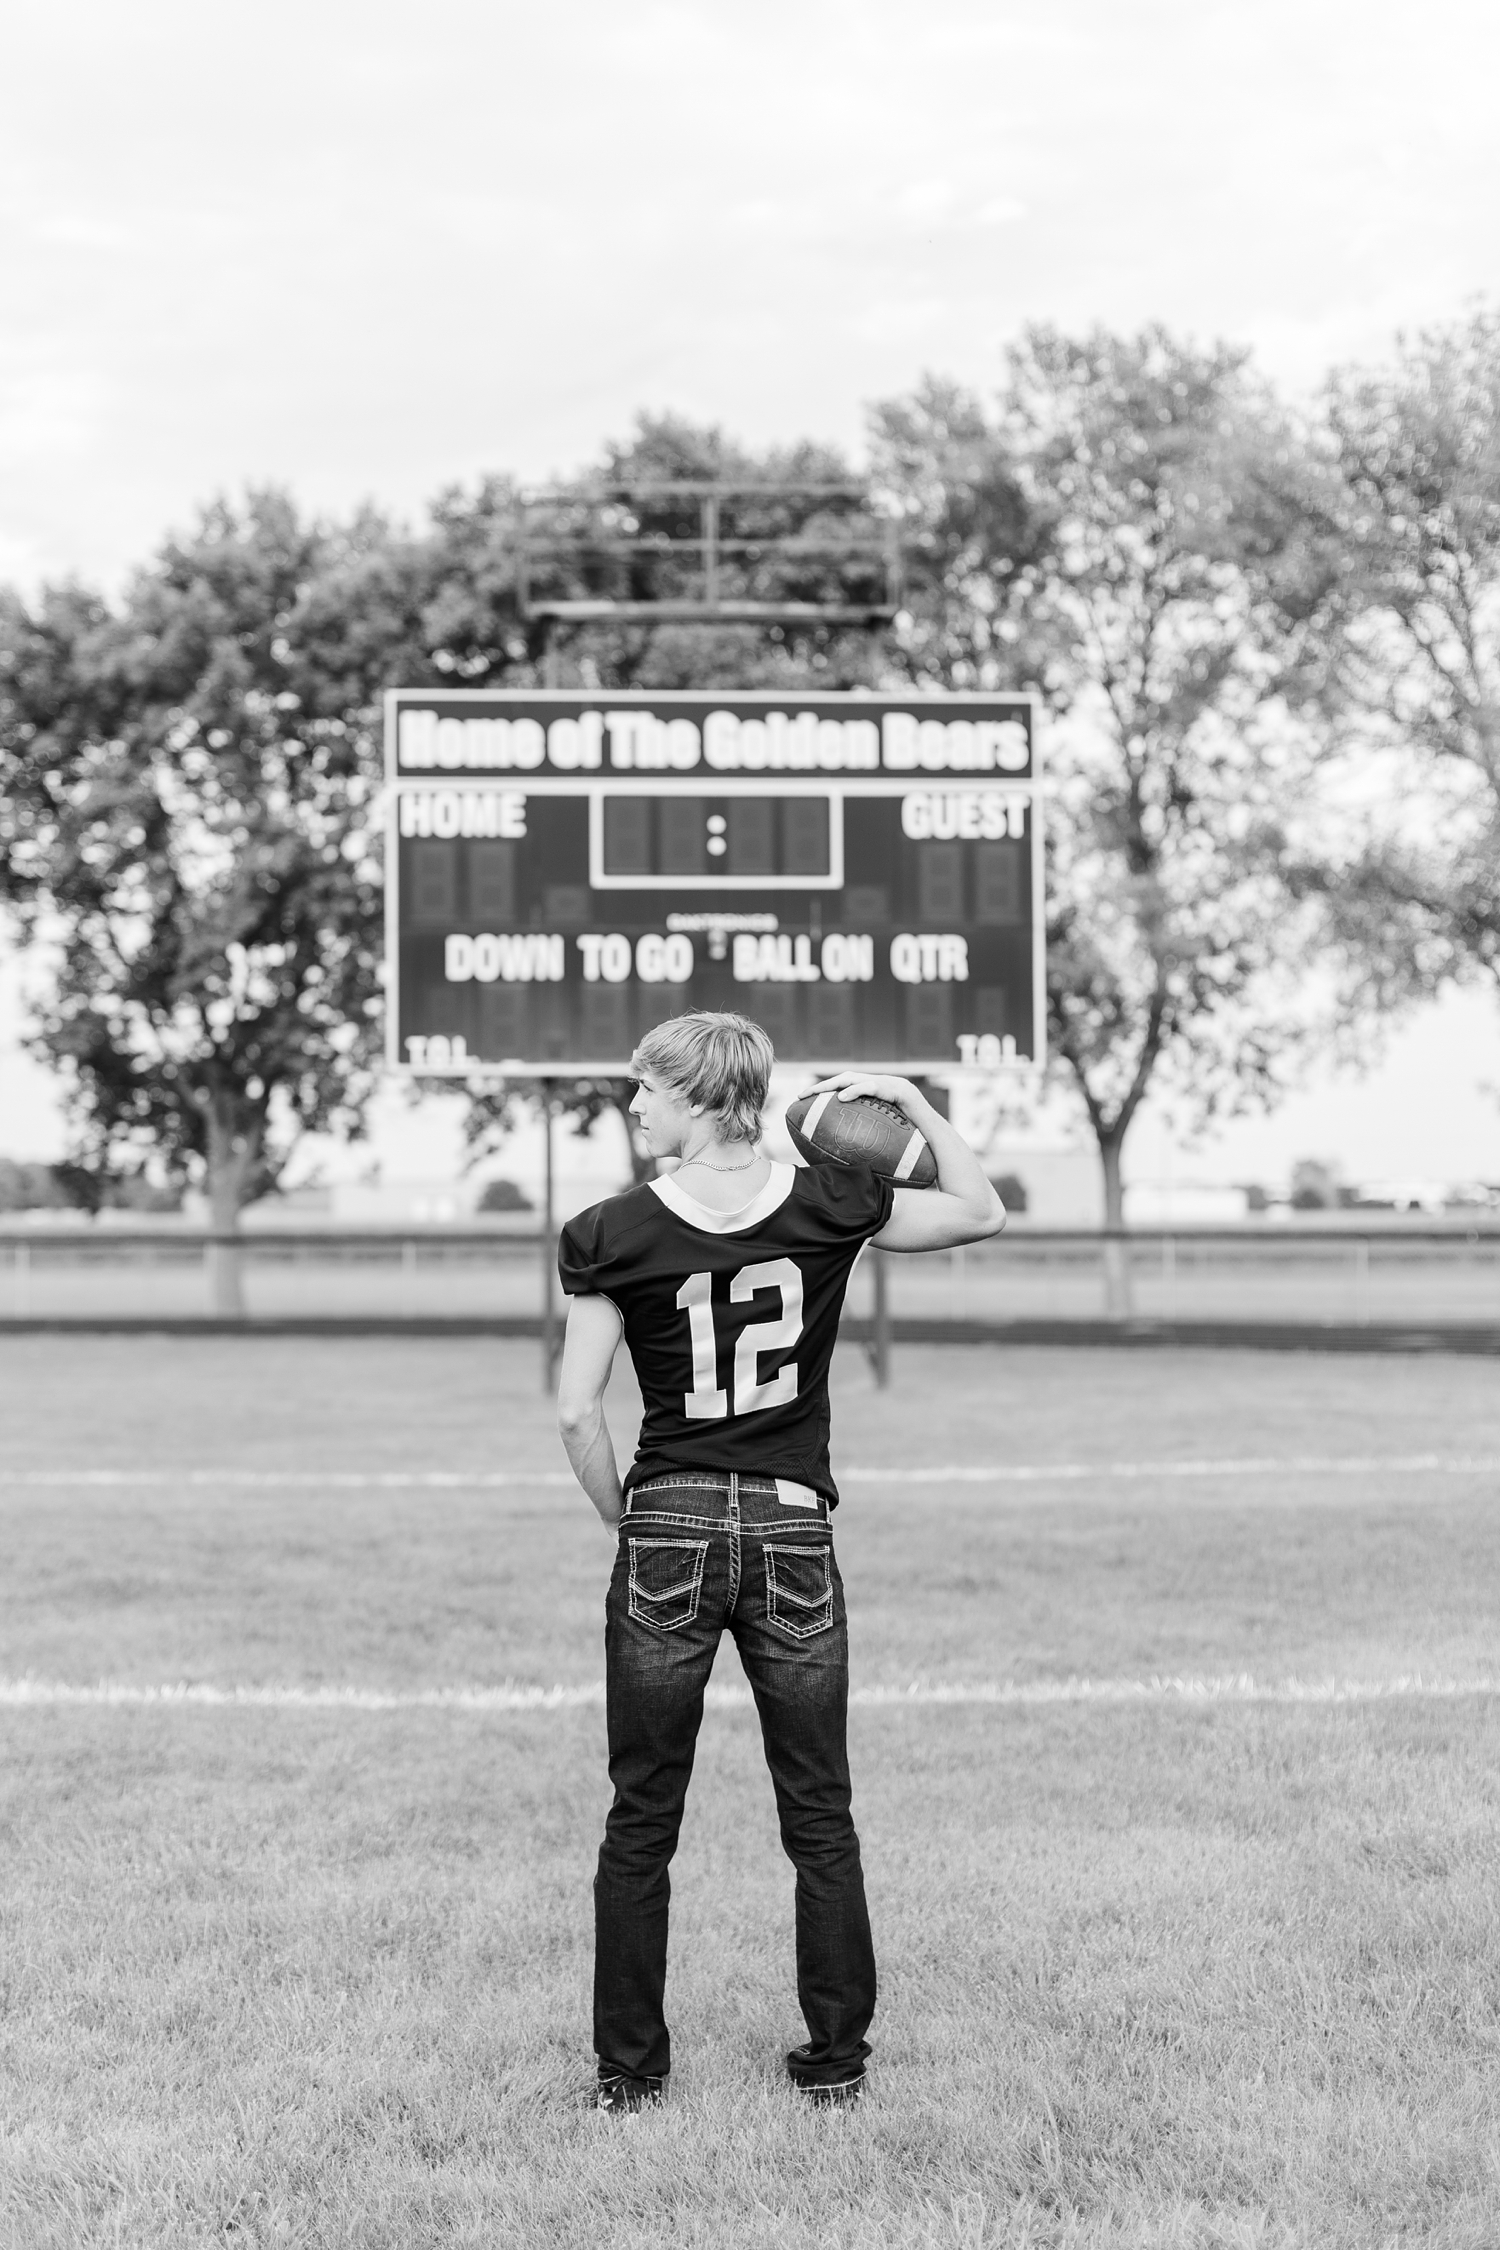 Justin stands on the football field and holds a football on his shoulder as he faces the scoreboard | CB Studio